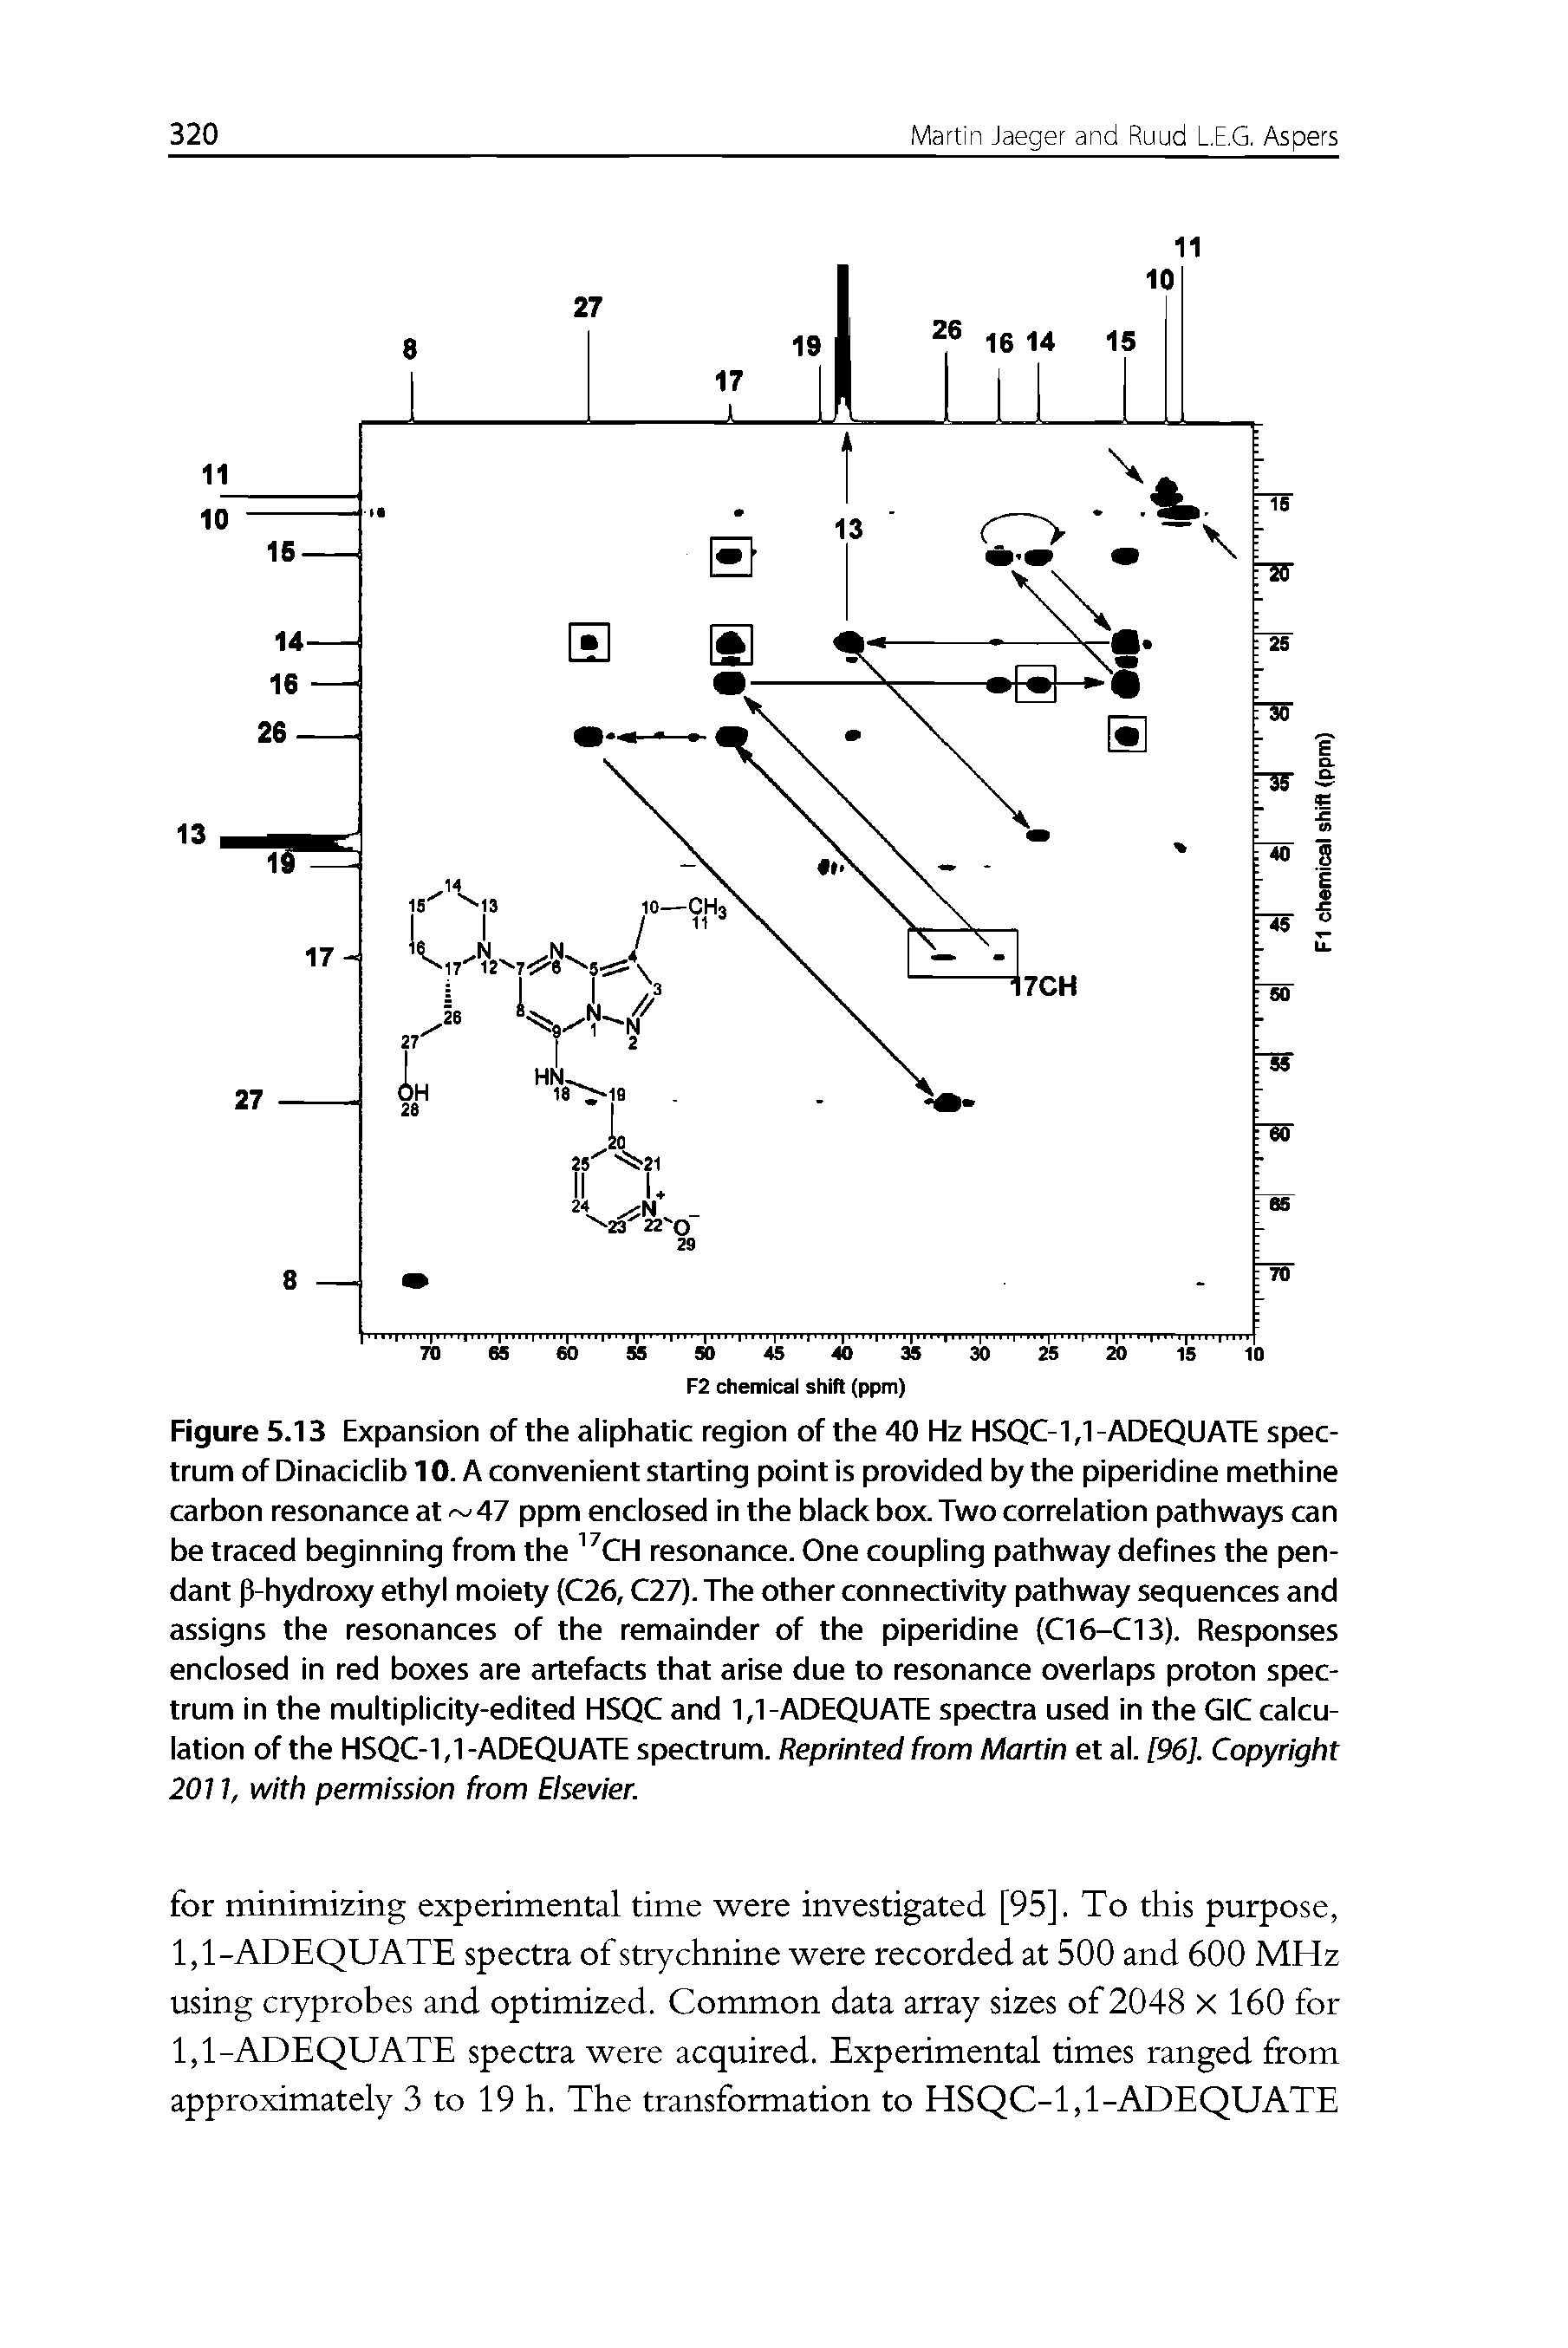 Figure 5.13 Expansion of the aliphatic region of the 40 Hz HSQC-1,1-ADEQUATE spectrum of Dinaciclib 10. A convenient starting point is provided by the piperidine methine carbon resonance at 47 ppm enclosed in the black box. Two correlation pathways can be traced beginning from the resonance. One coupling pathway defines the pendant p-hydroxy ethyl moiety (C26, C27). The other connectivity pathway sequences and assigns the resonances of the remainder of the piperidine (C16-C13). Responses enclosed in red boxes are artefacts that arise due to resonance overlaps proton spectrum in the multiplicity-edited HSQC and 1,1-ADEQUATE spectra used in the GIC calculation of the HSQC-1,1-ADEQUATE spectrum. Reprinted from Martin et al. [96]. Copyright 2011, with permission from Elsevier.